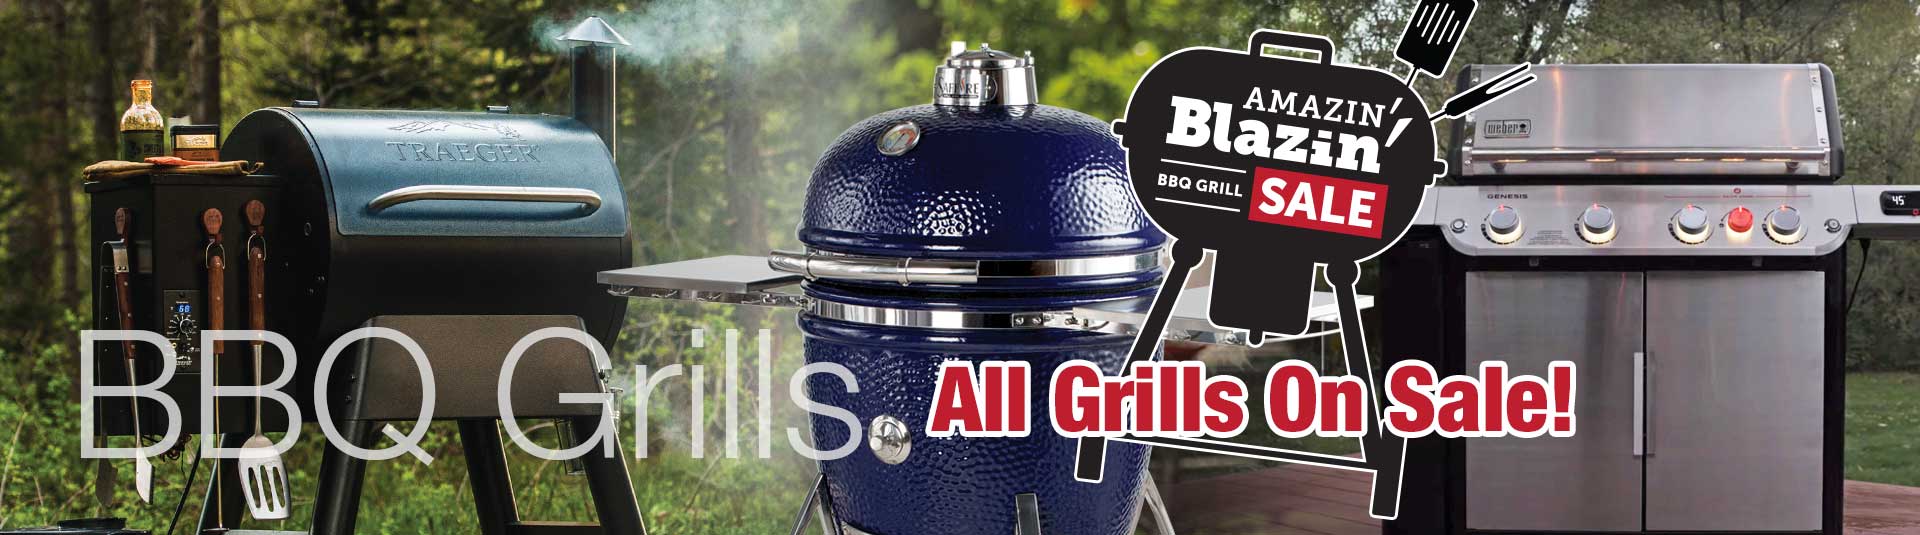 ALL BBQ Grills ON SALE during the Amazin' Blazin' BBQ Grill Sale Going on Now at Benson Stone Company!